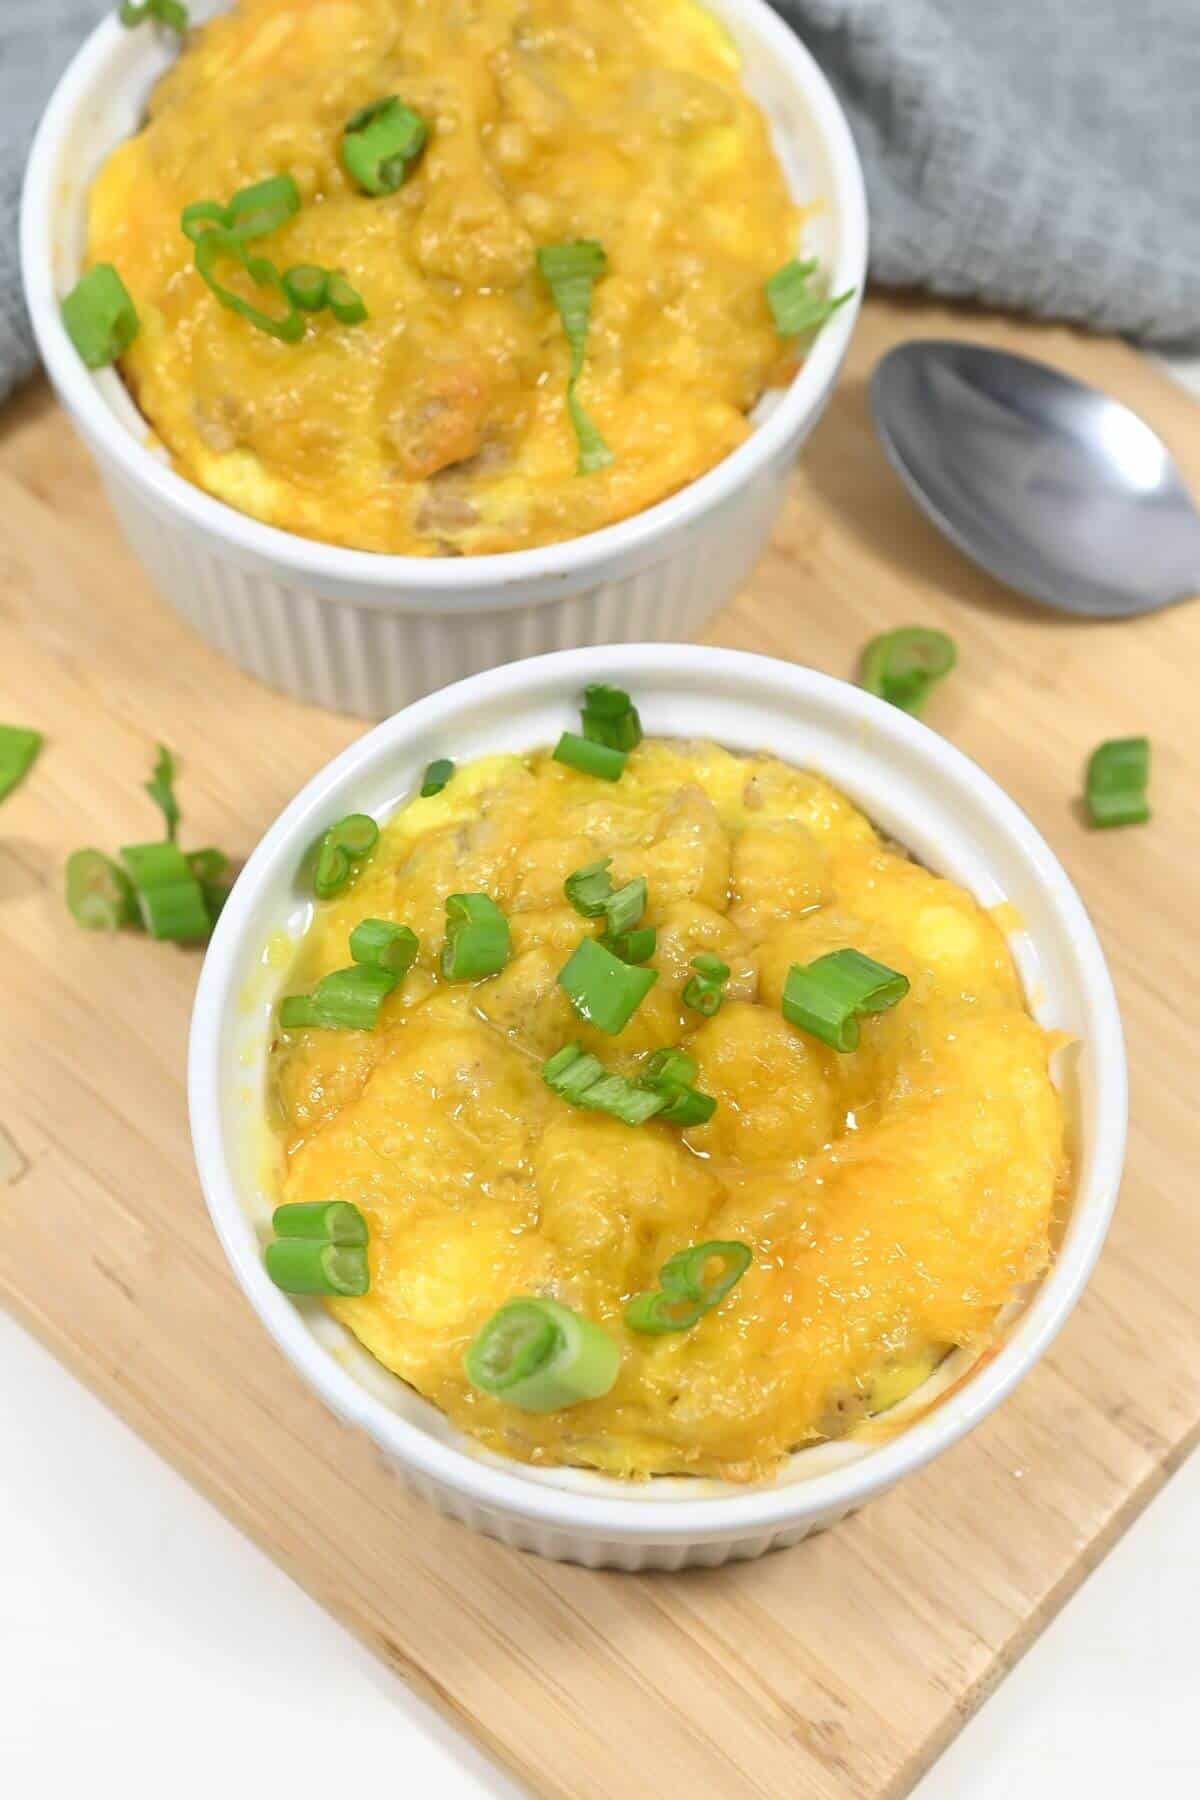 Two ramekins of baked cheesy biscuit breakfast casserole topped with green onions on a wooden surface.